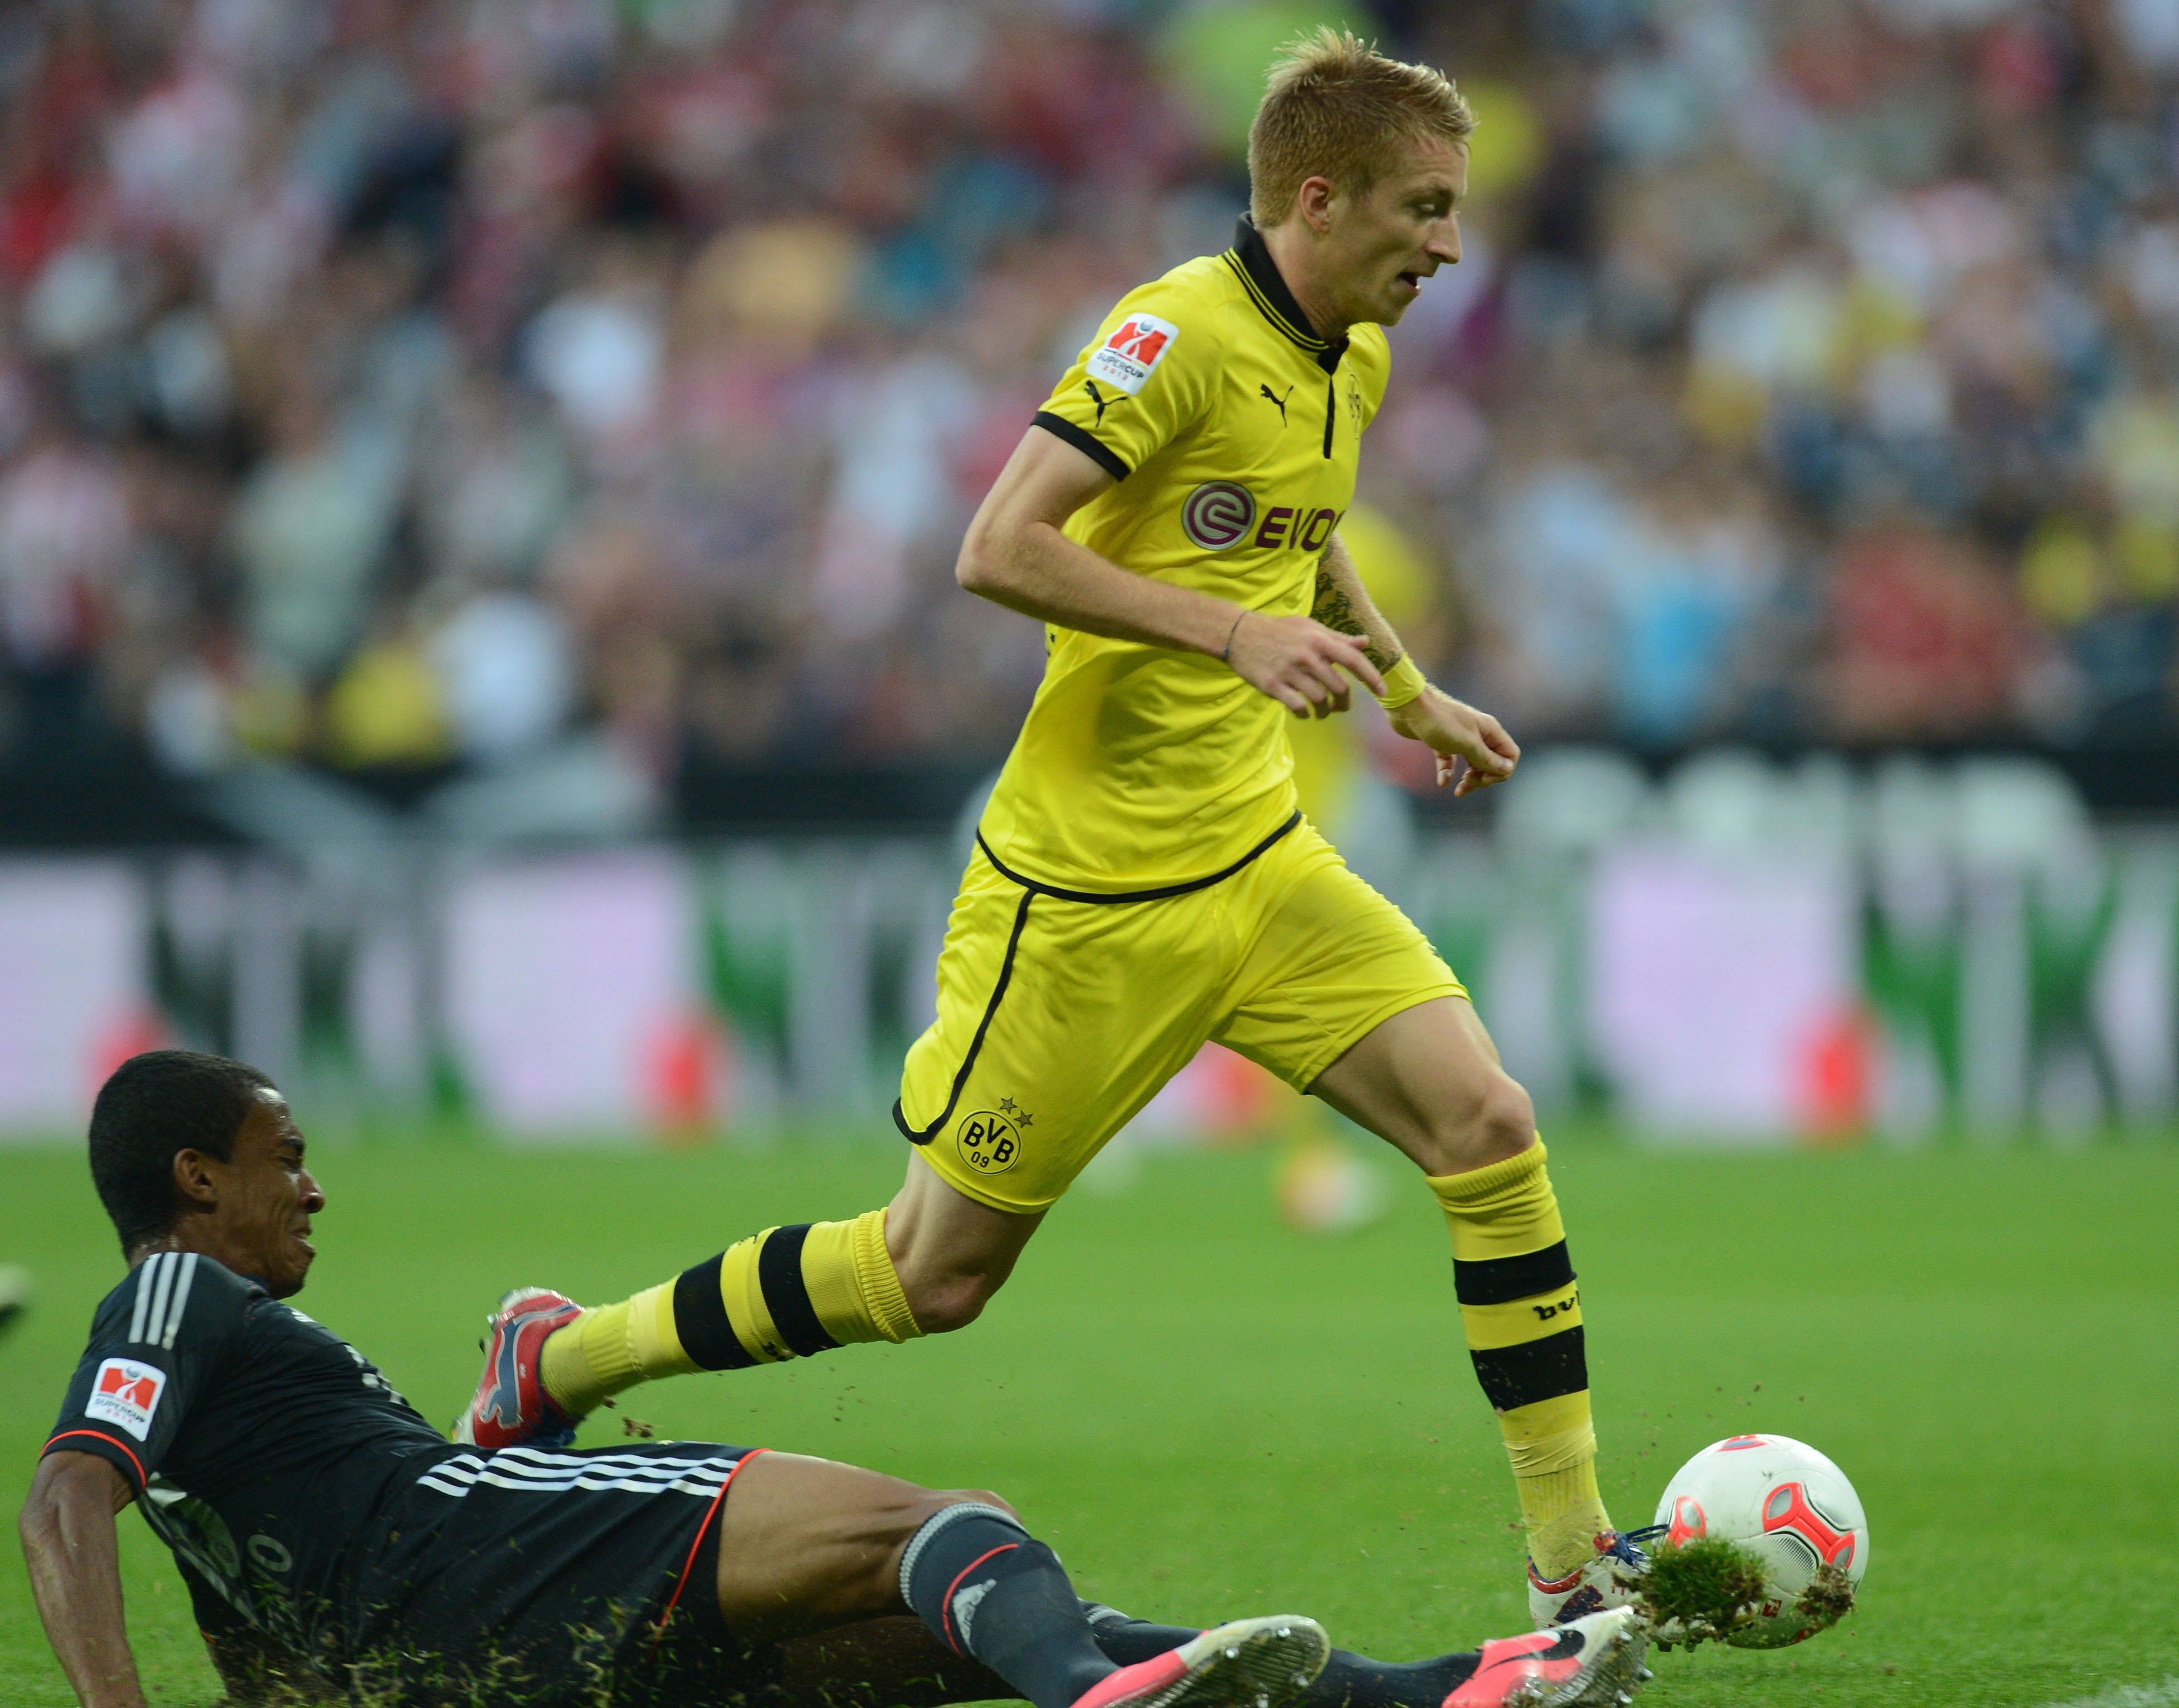  Action photo of professional German soccer player, Marco Reus, playing for Borussia Dortmund.